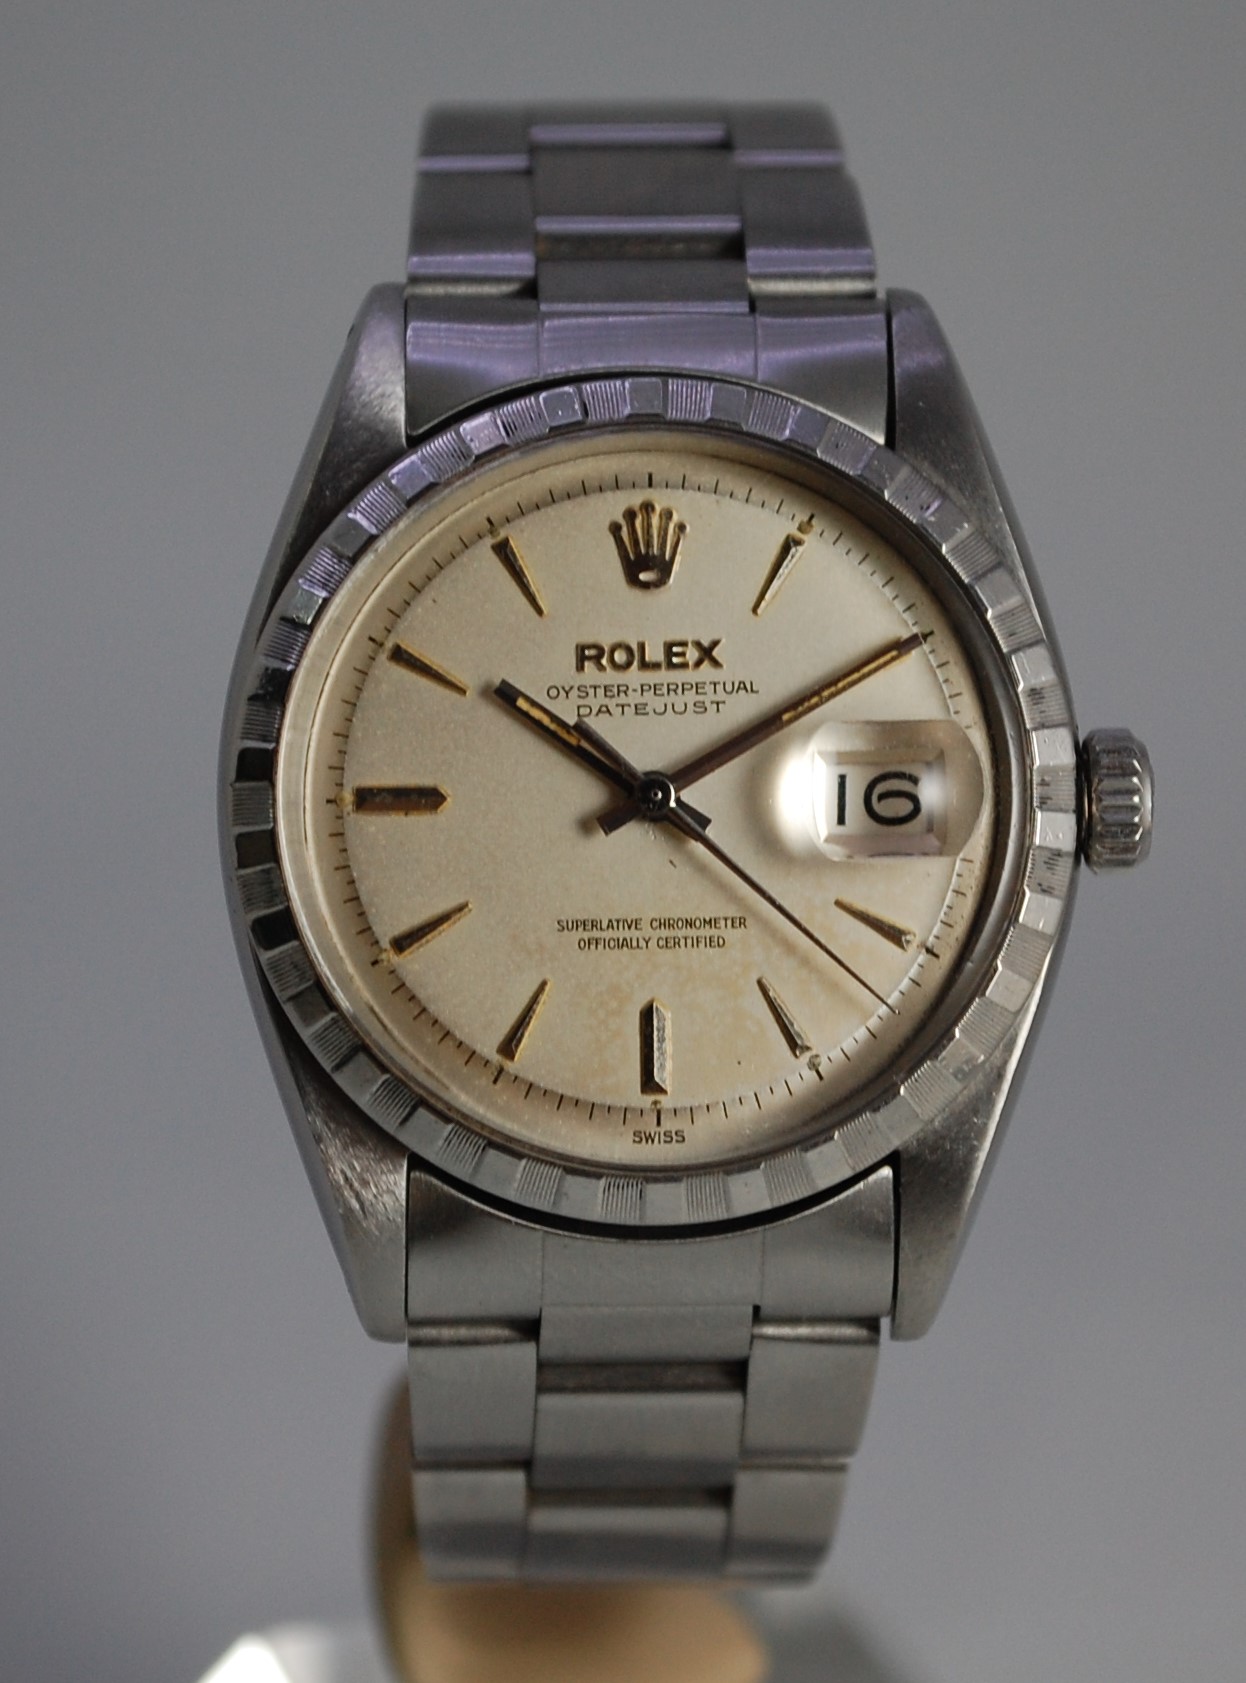 SOLD 1959 Rolex Datejust reference - Birth Year Watches